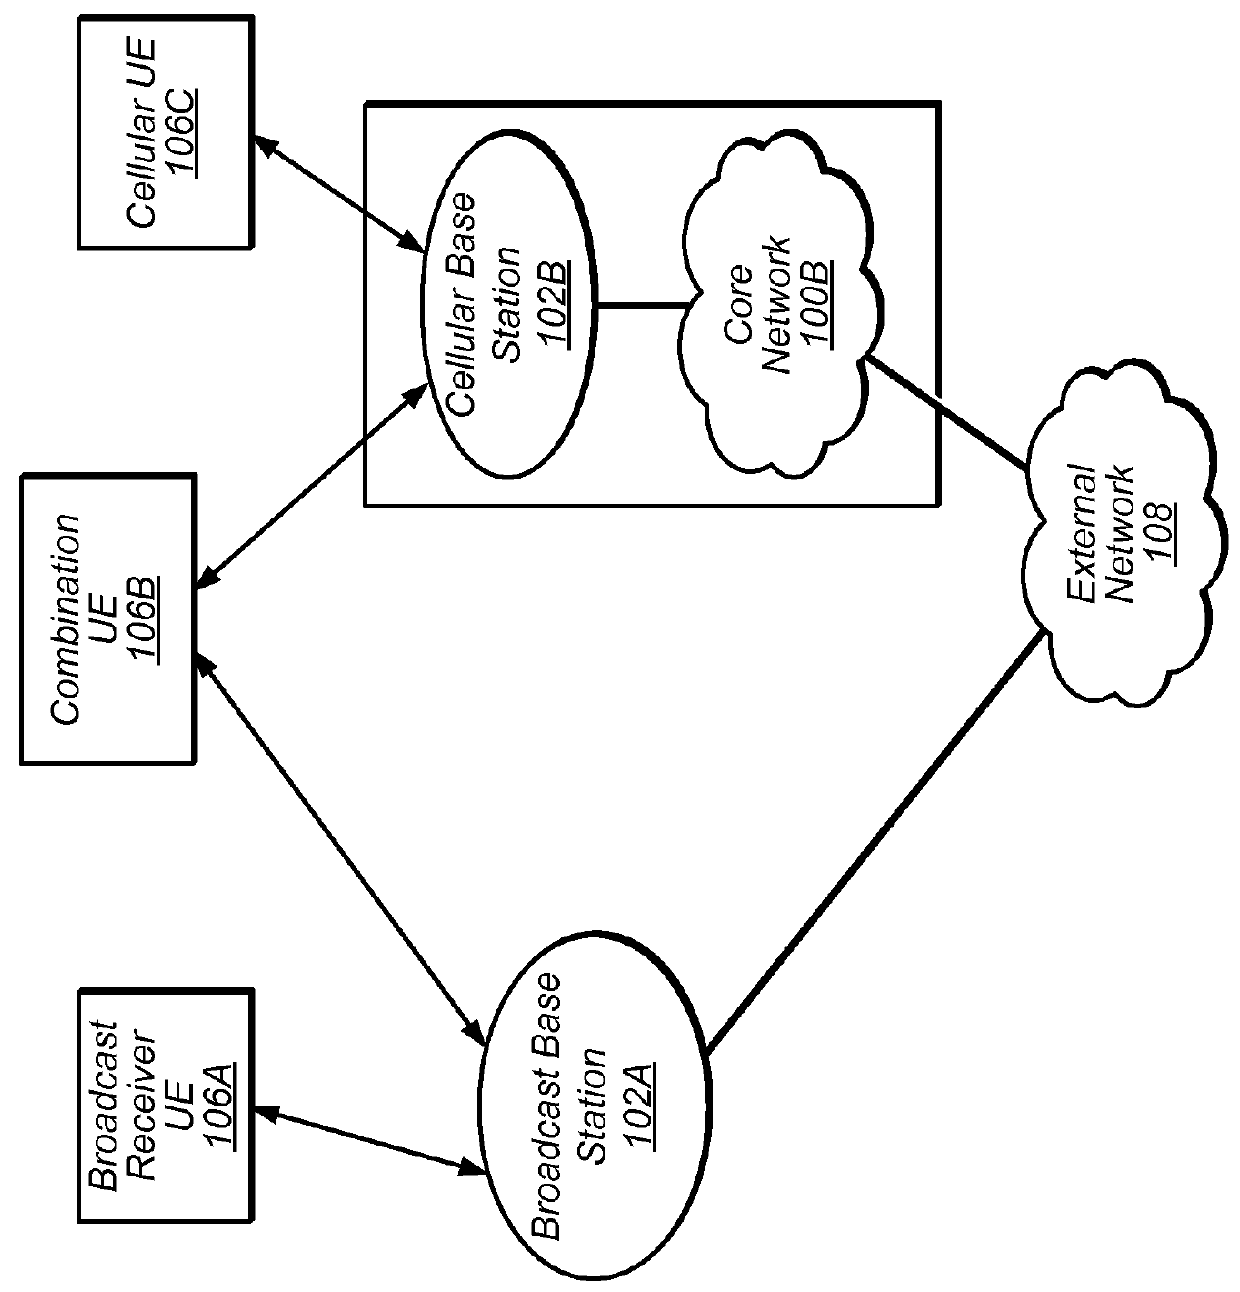 Shared Spectrum Access for Broadcast and Bi-Directional, Packet-Switched Communications